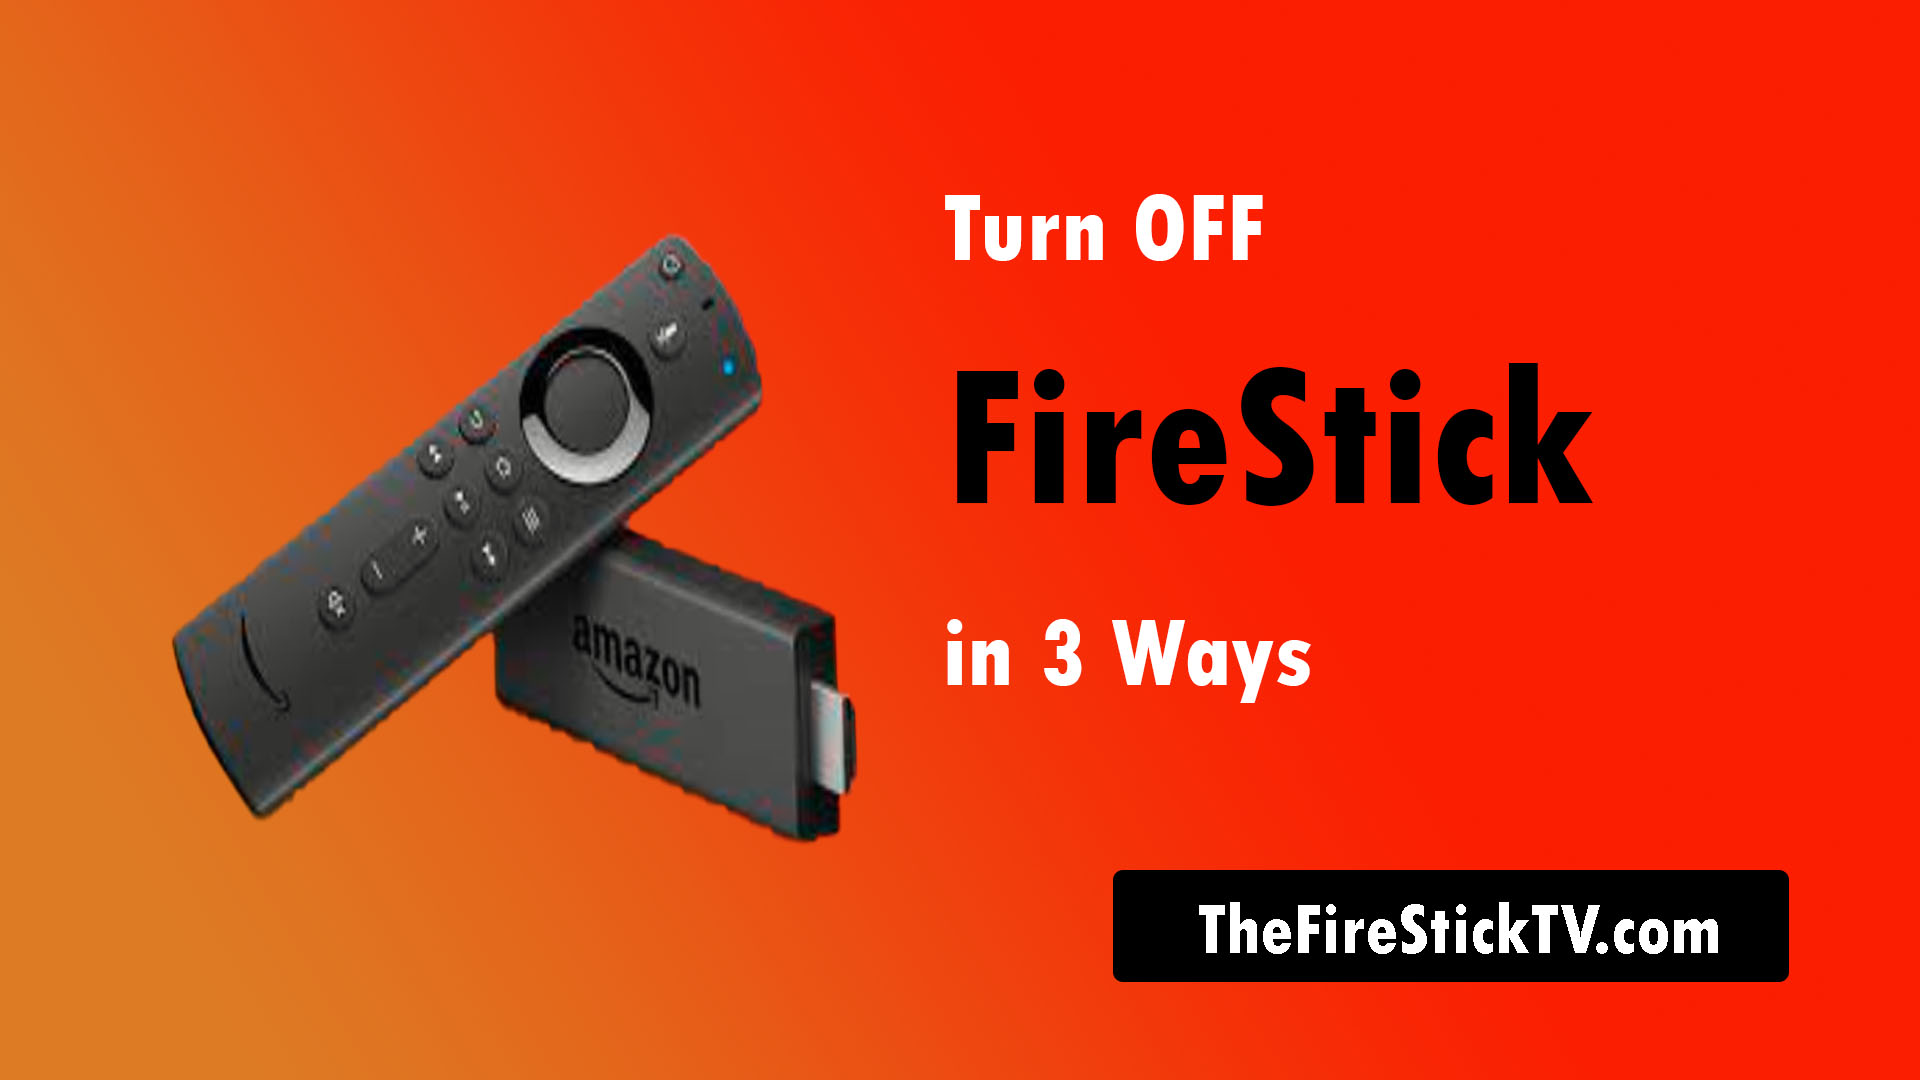 How to Turn off Firestick - 3 Easy Ways to Turn Off Amazon Fire TV Stick